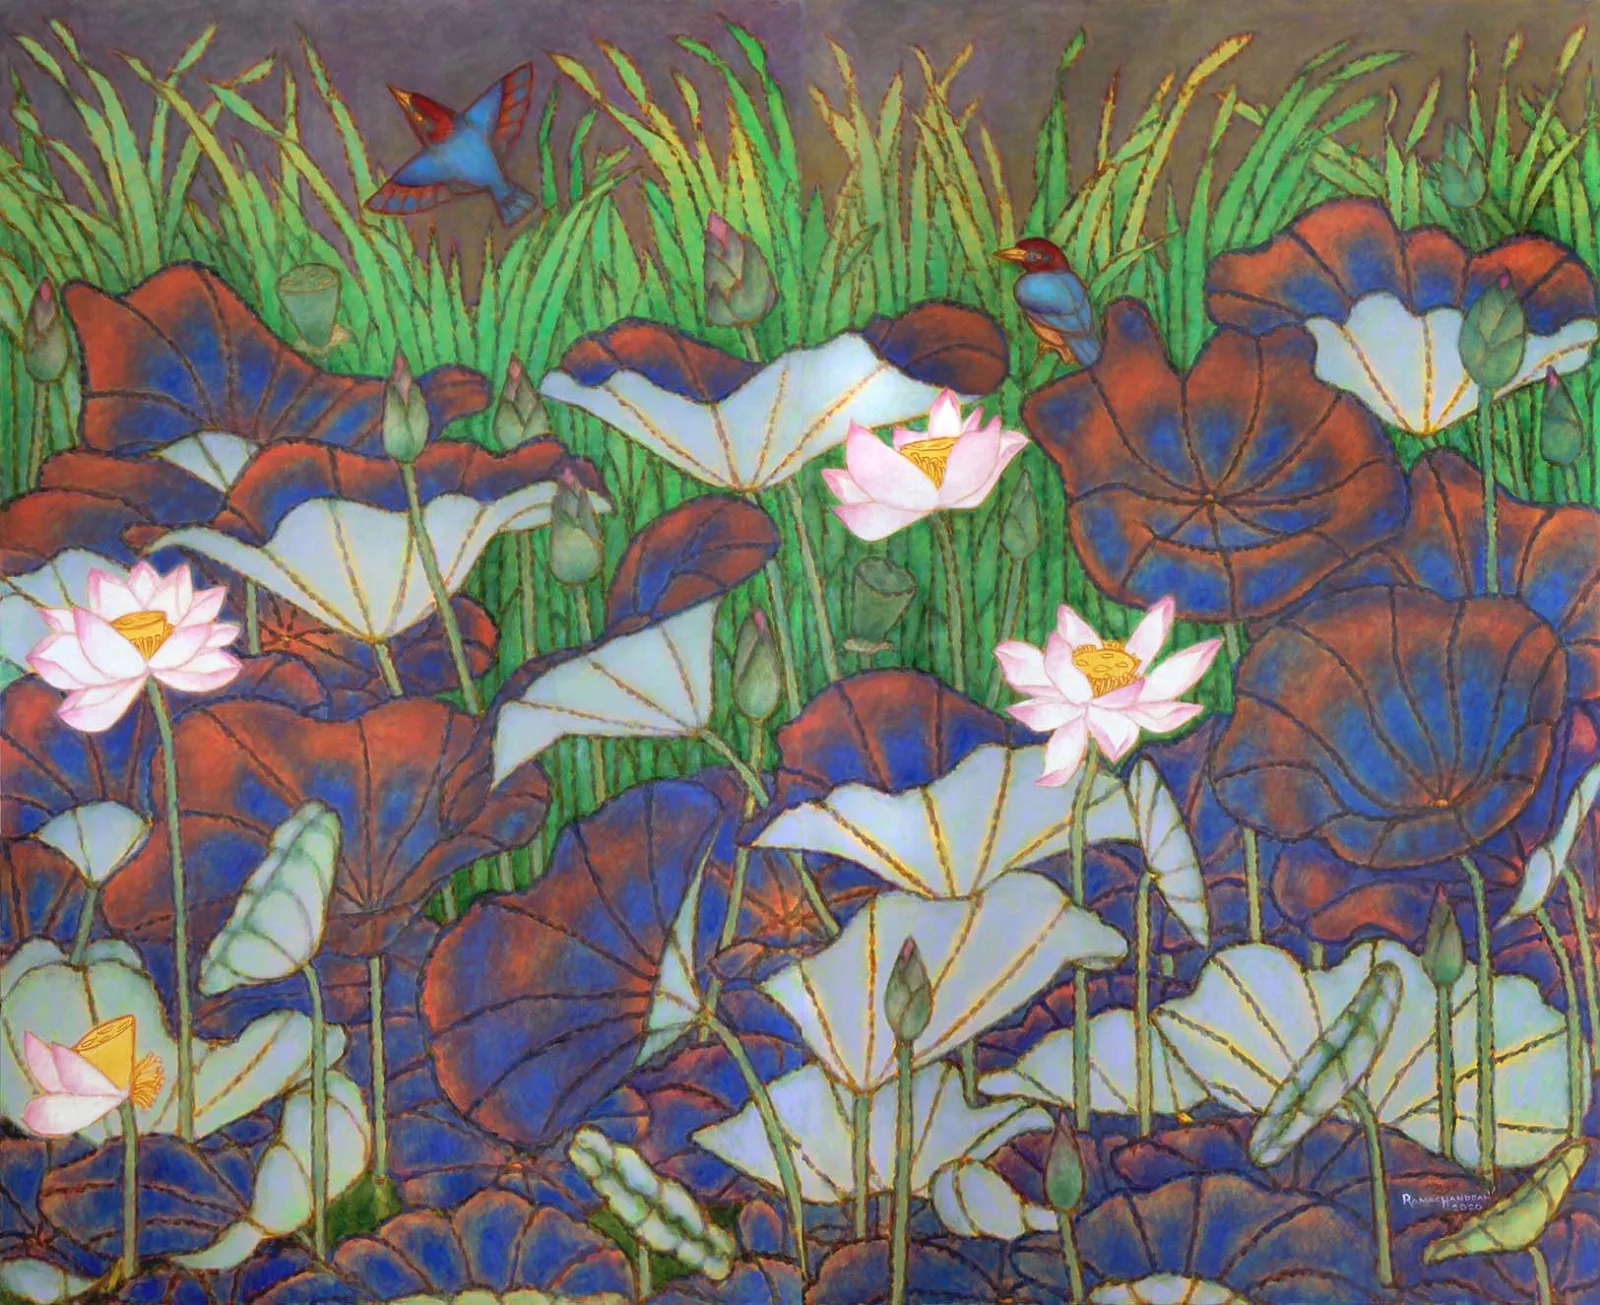 About the Artwork A. Ramachandran. Lotus Pond at Sunset. 2020  by A. Ramachandran